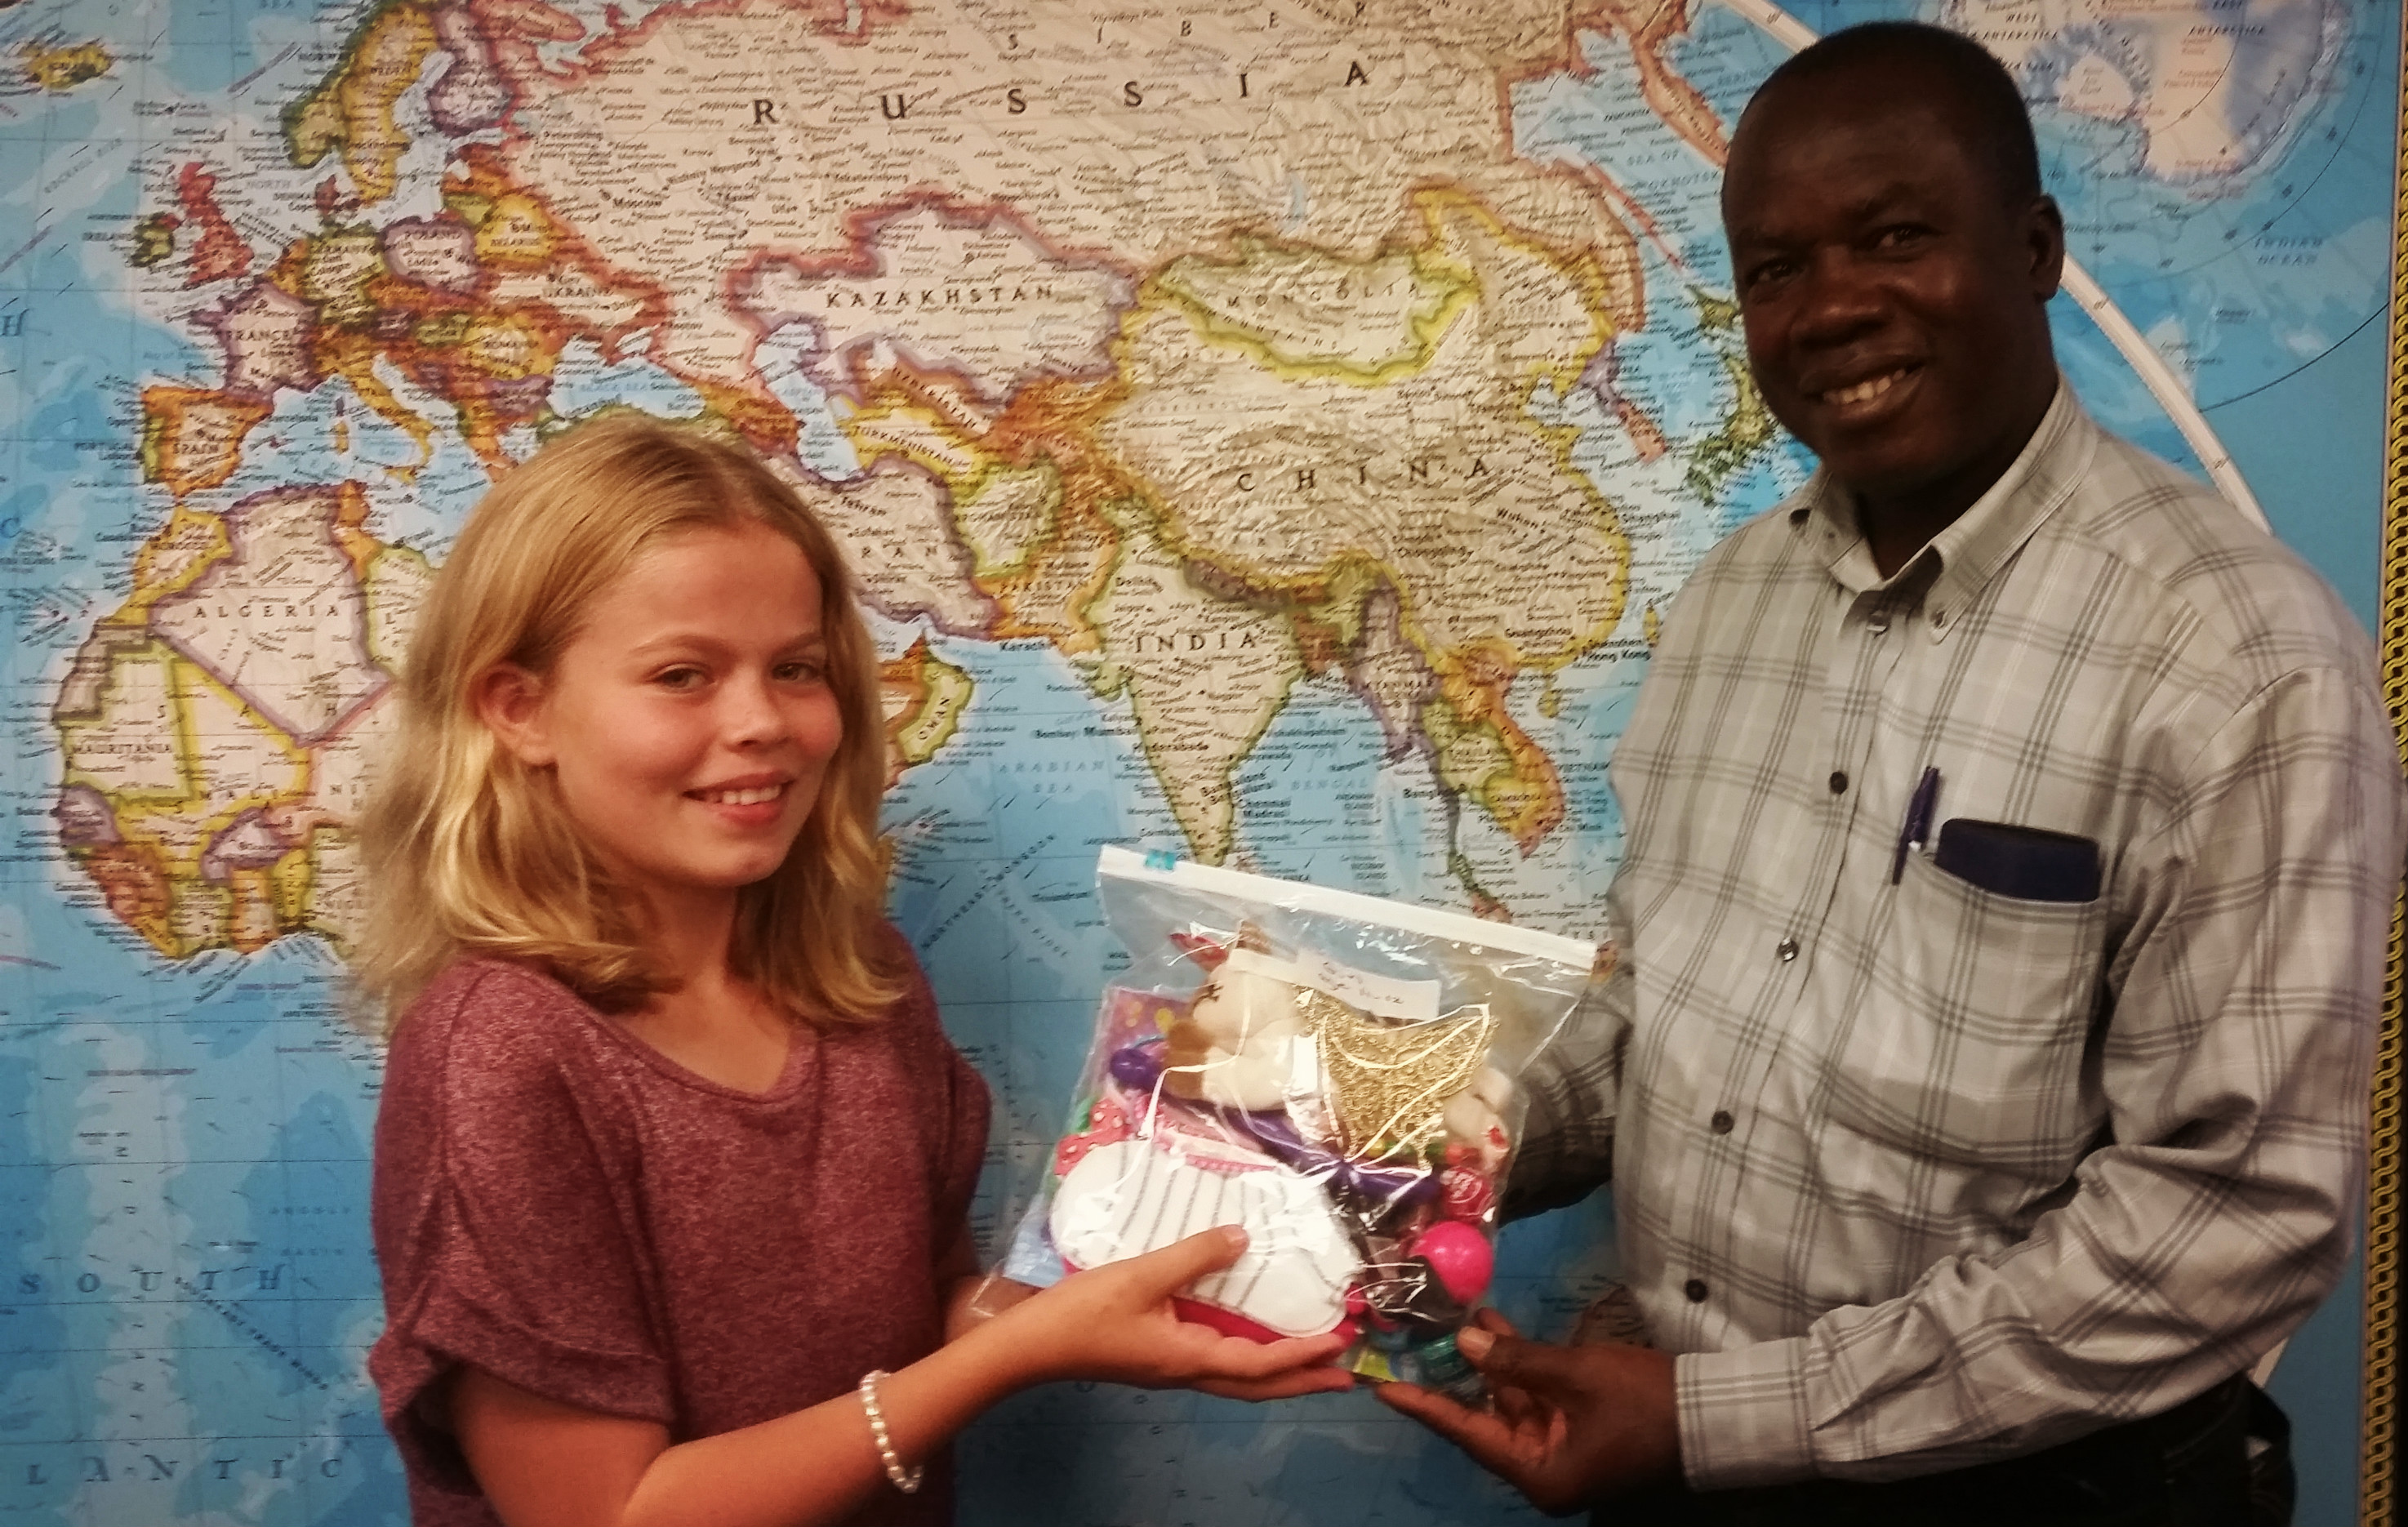 Paige’s Story: “I felt called to do something for the kids in Haiti”